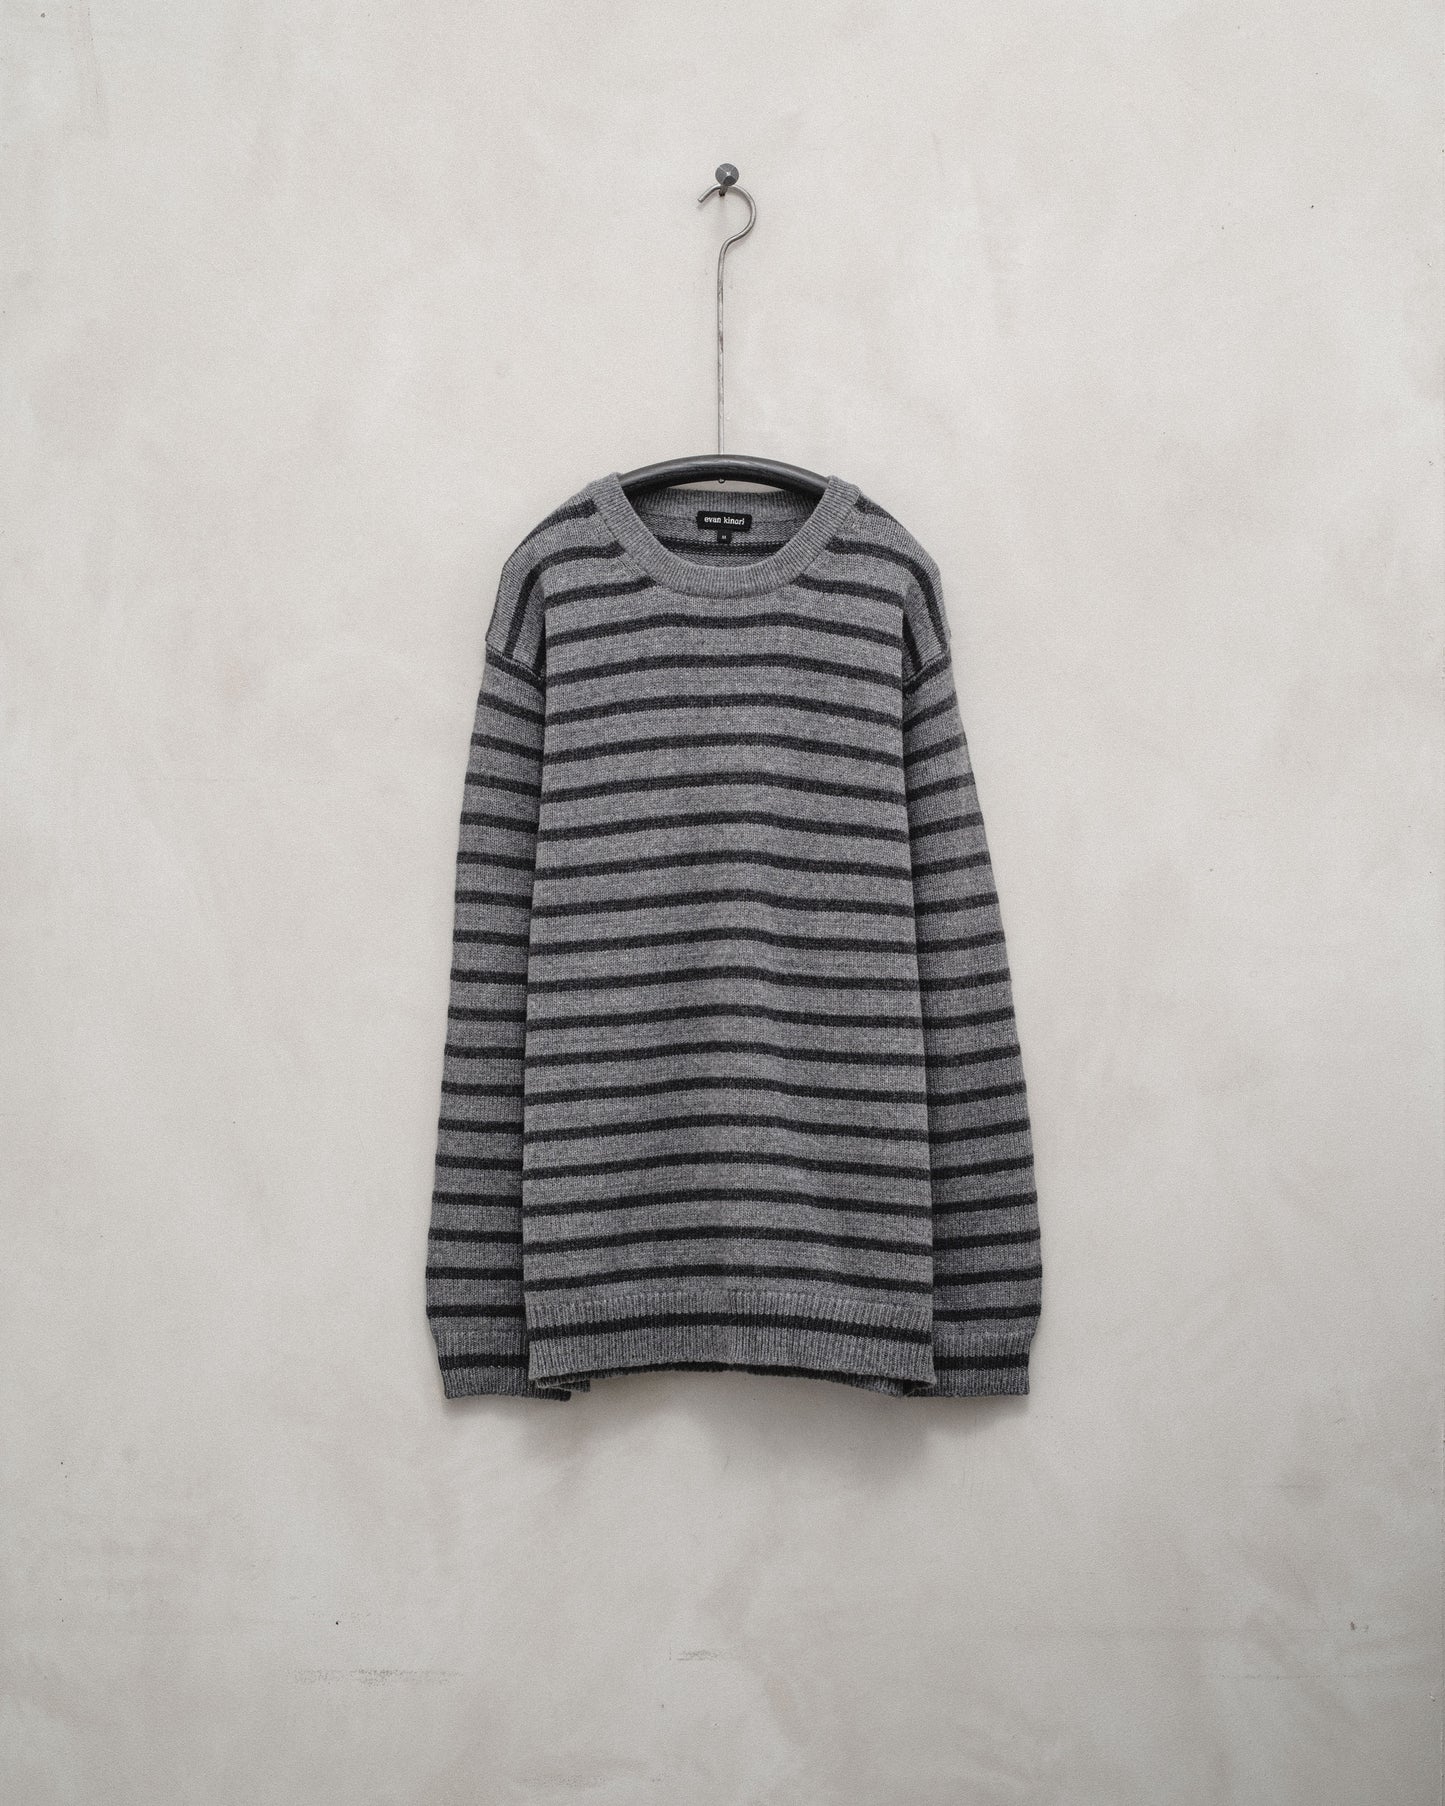 Striped Sweater - Striped Cashmere/Lambswool, Grey/Charcoal